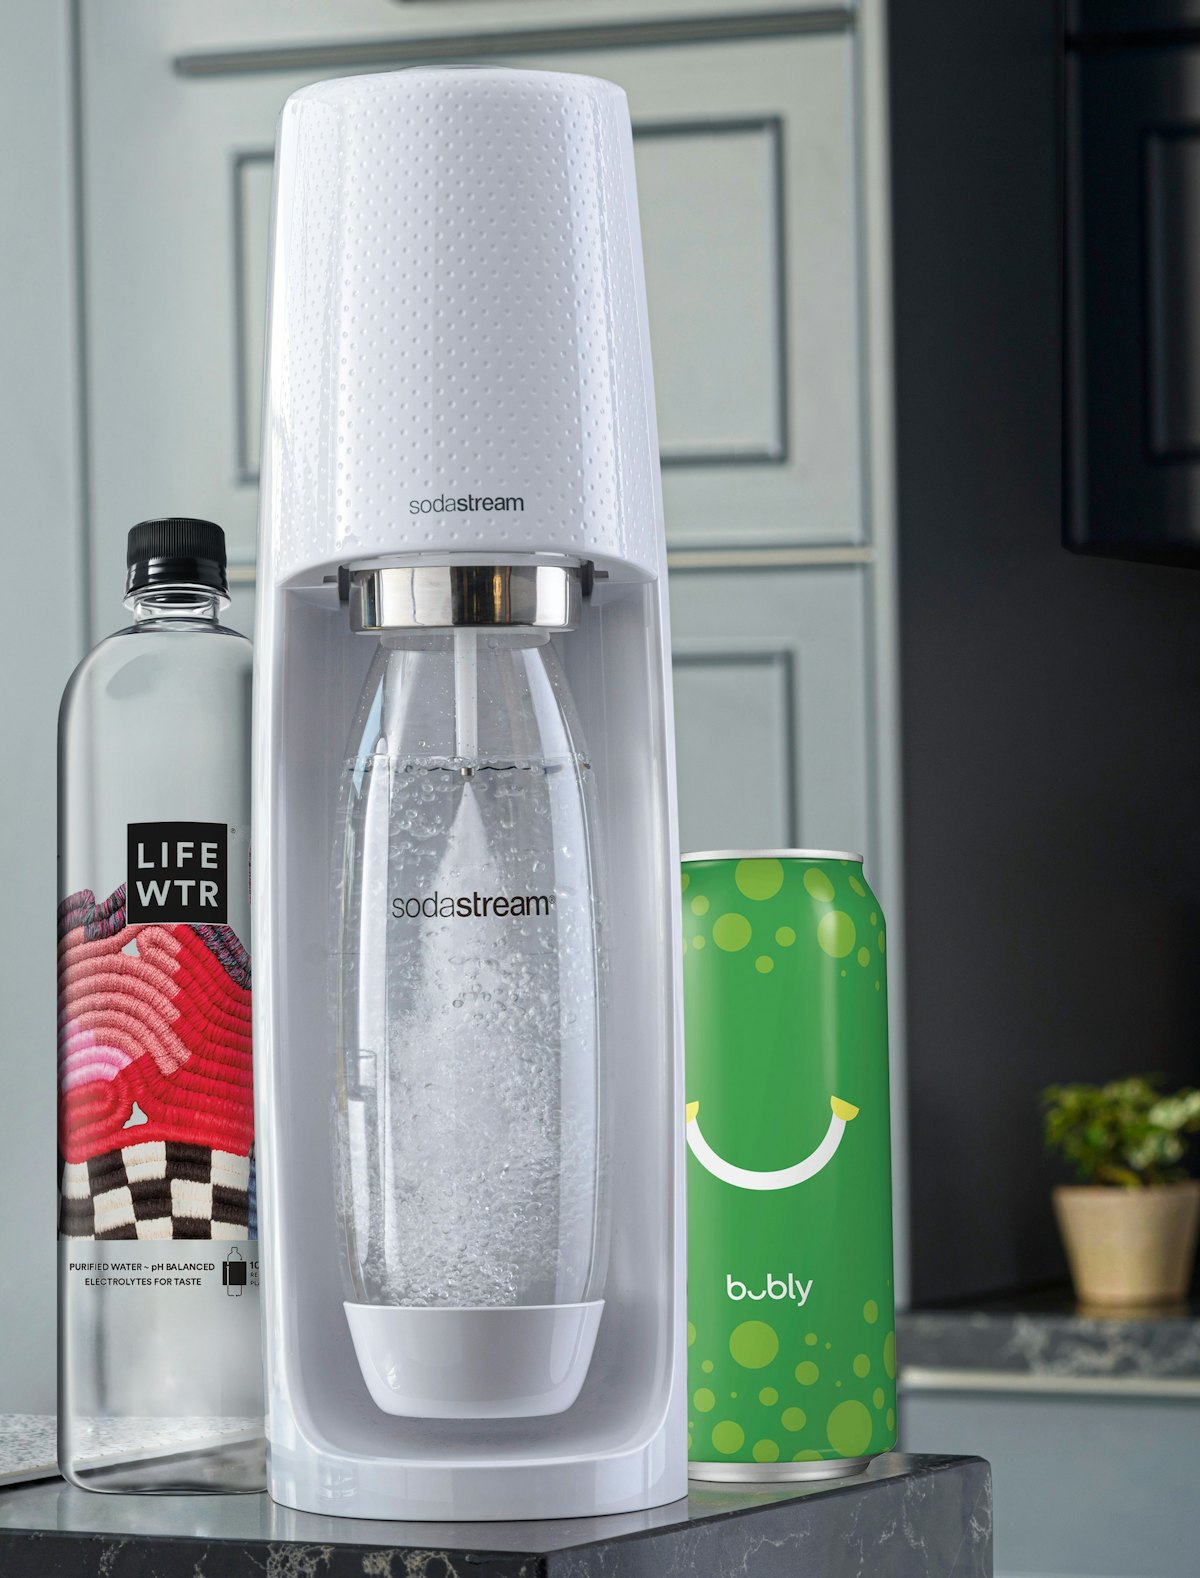 Reducing plastic waste and staying hydrated one SodaStream at a time